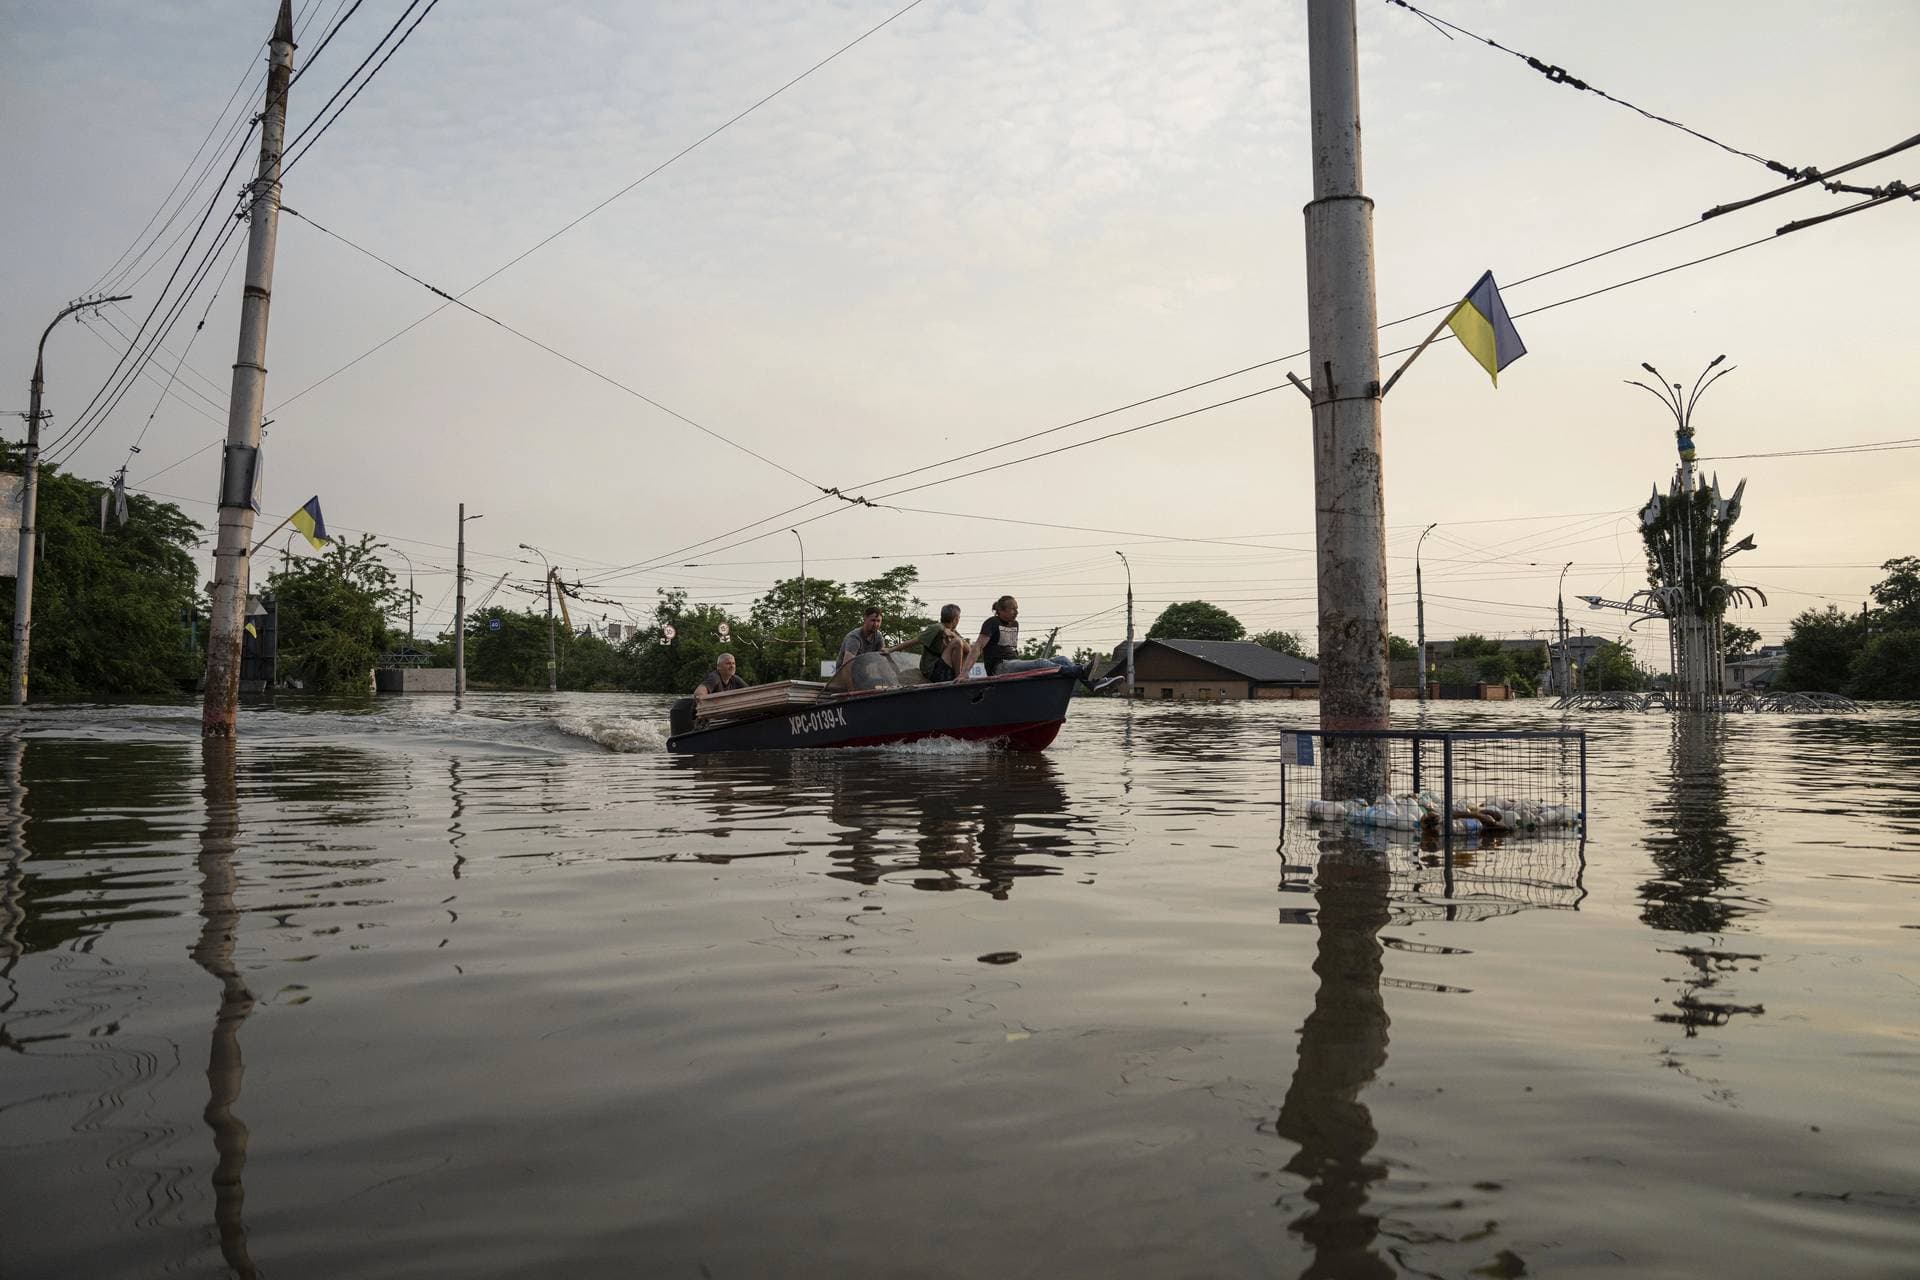 People ride by a boat through a flooded neighborhood in Kherson